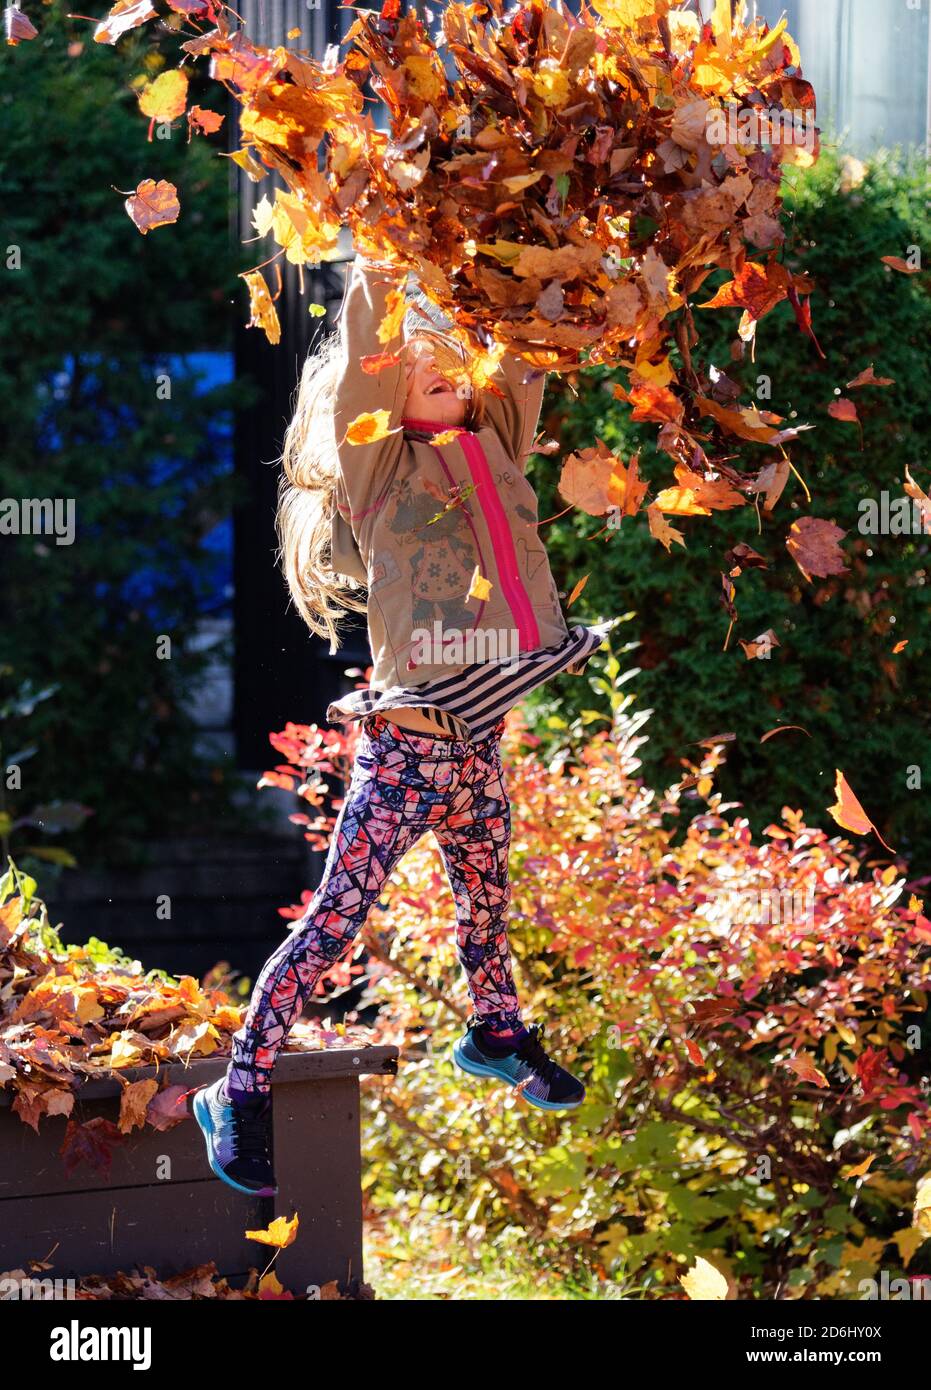 A 6 year old girl, jumping and throwing playing with autumn leaves Stock Photo